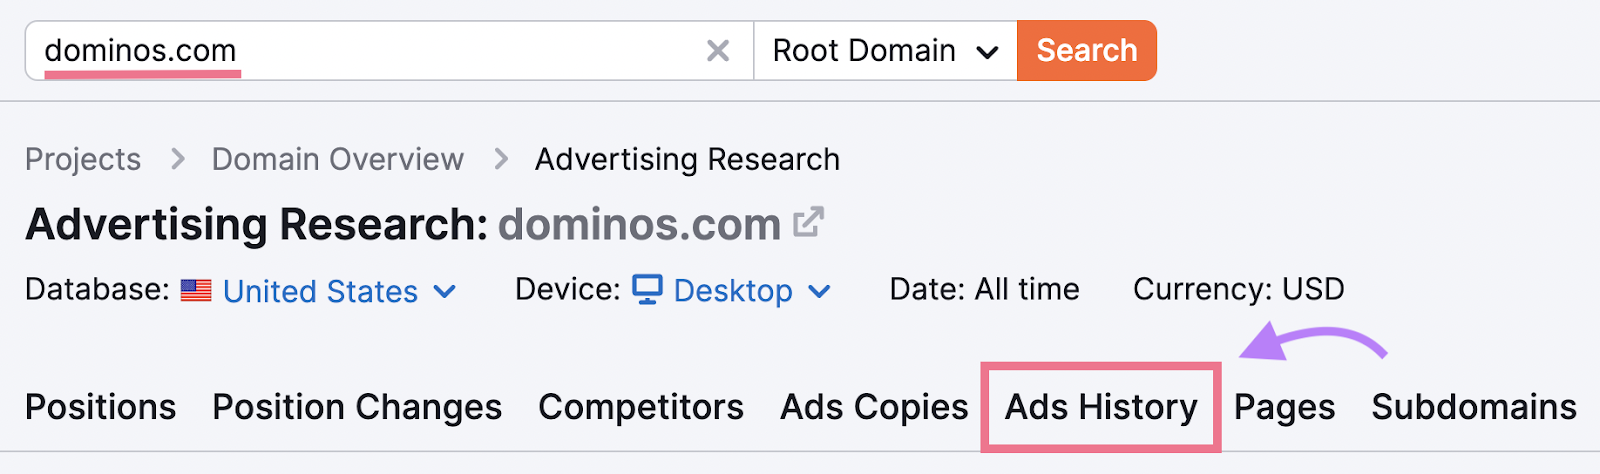 where to find “Ads History” tab in Advertising Research tool